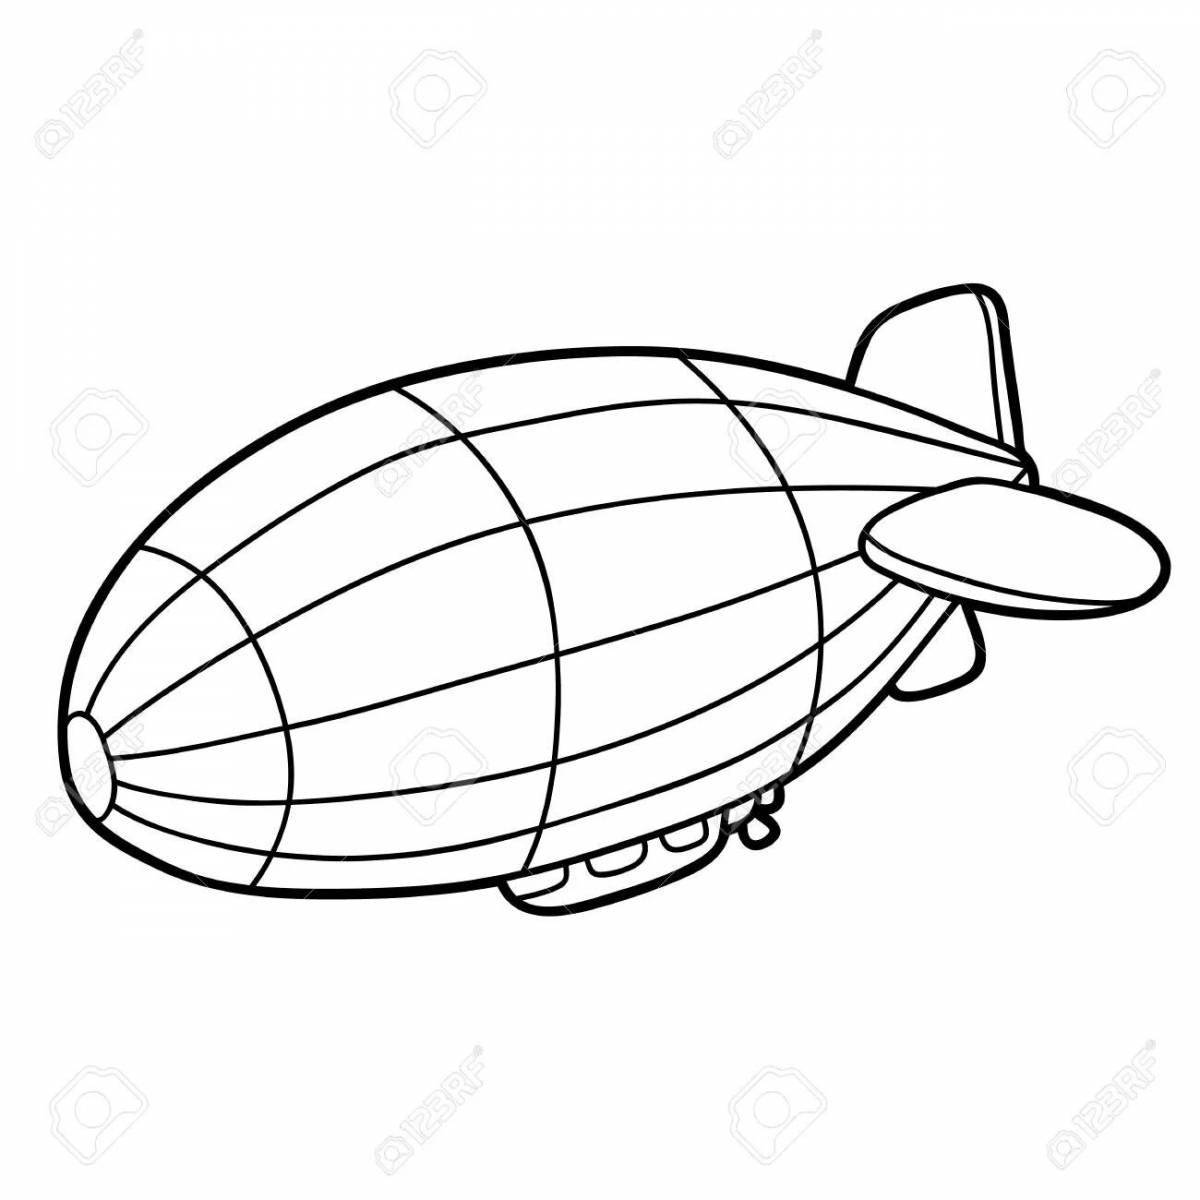 Fabulous airship coloring pages for kids